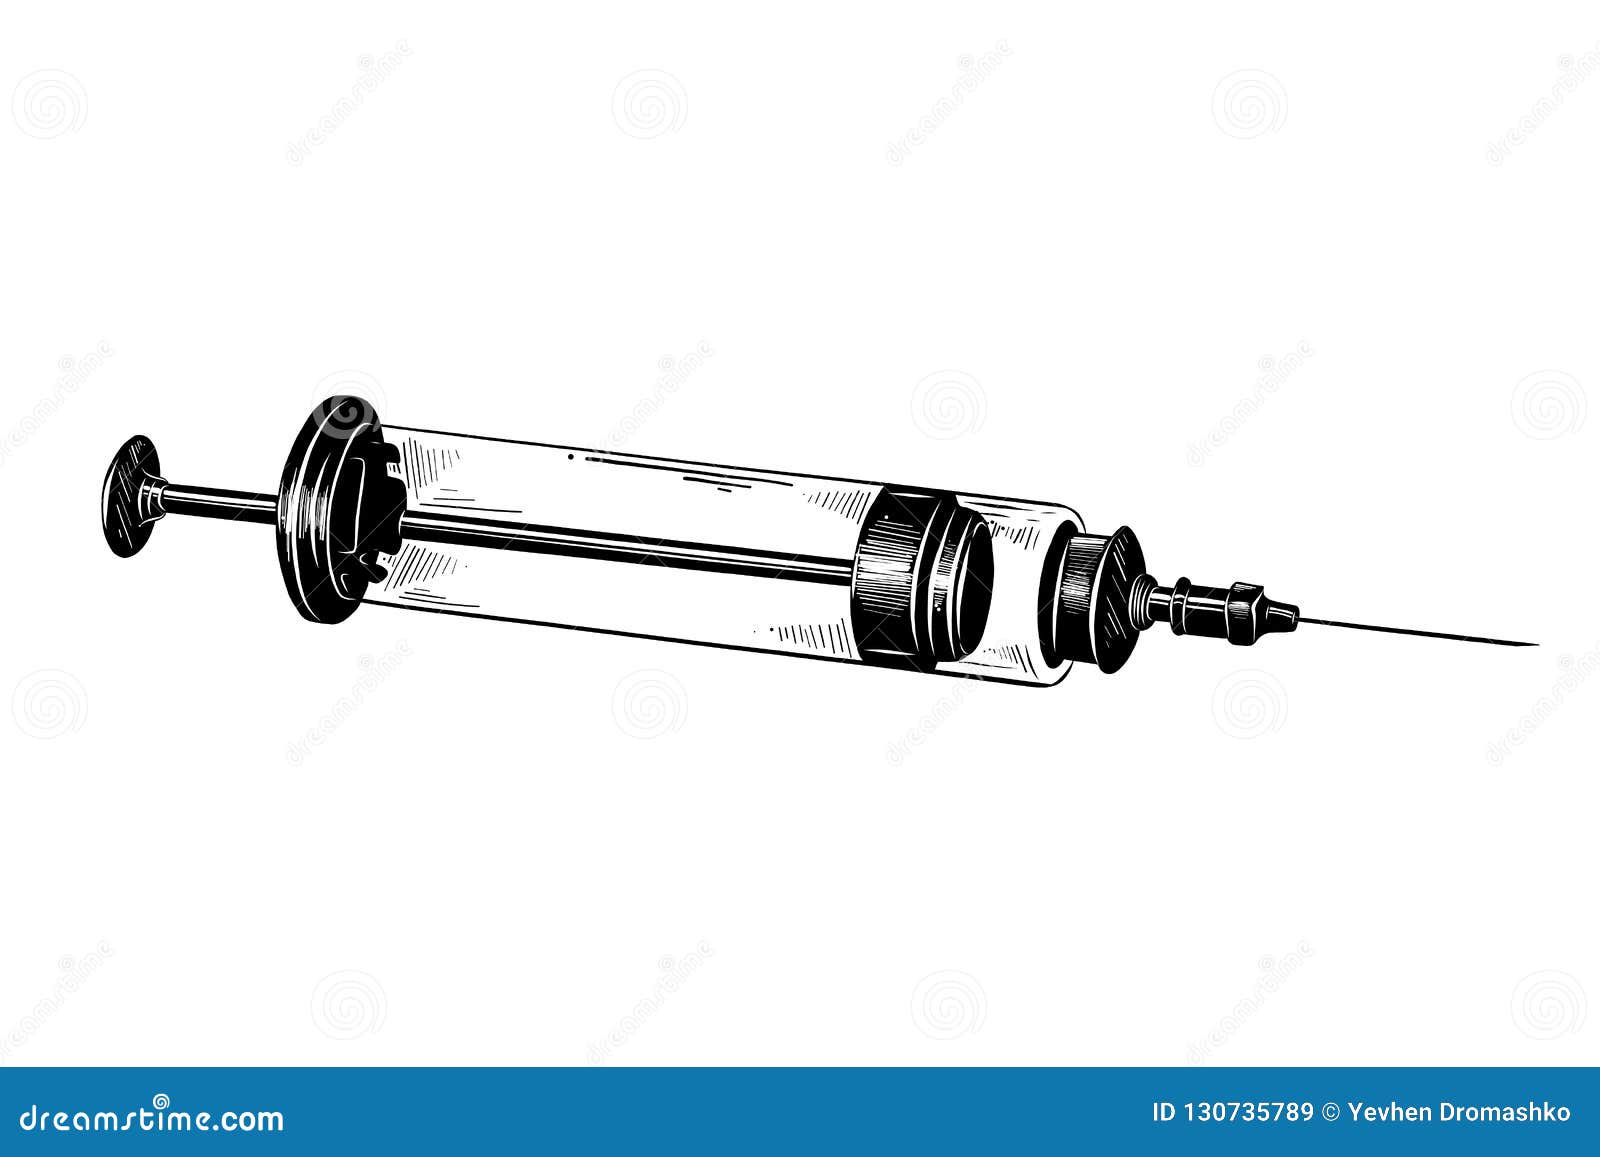 Hand Drawn Sketch Of Syringe In Black Isolated On White Background ...